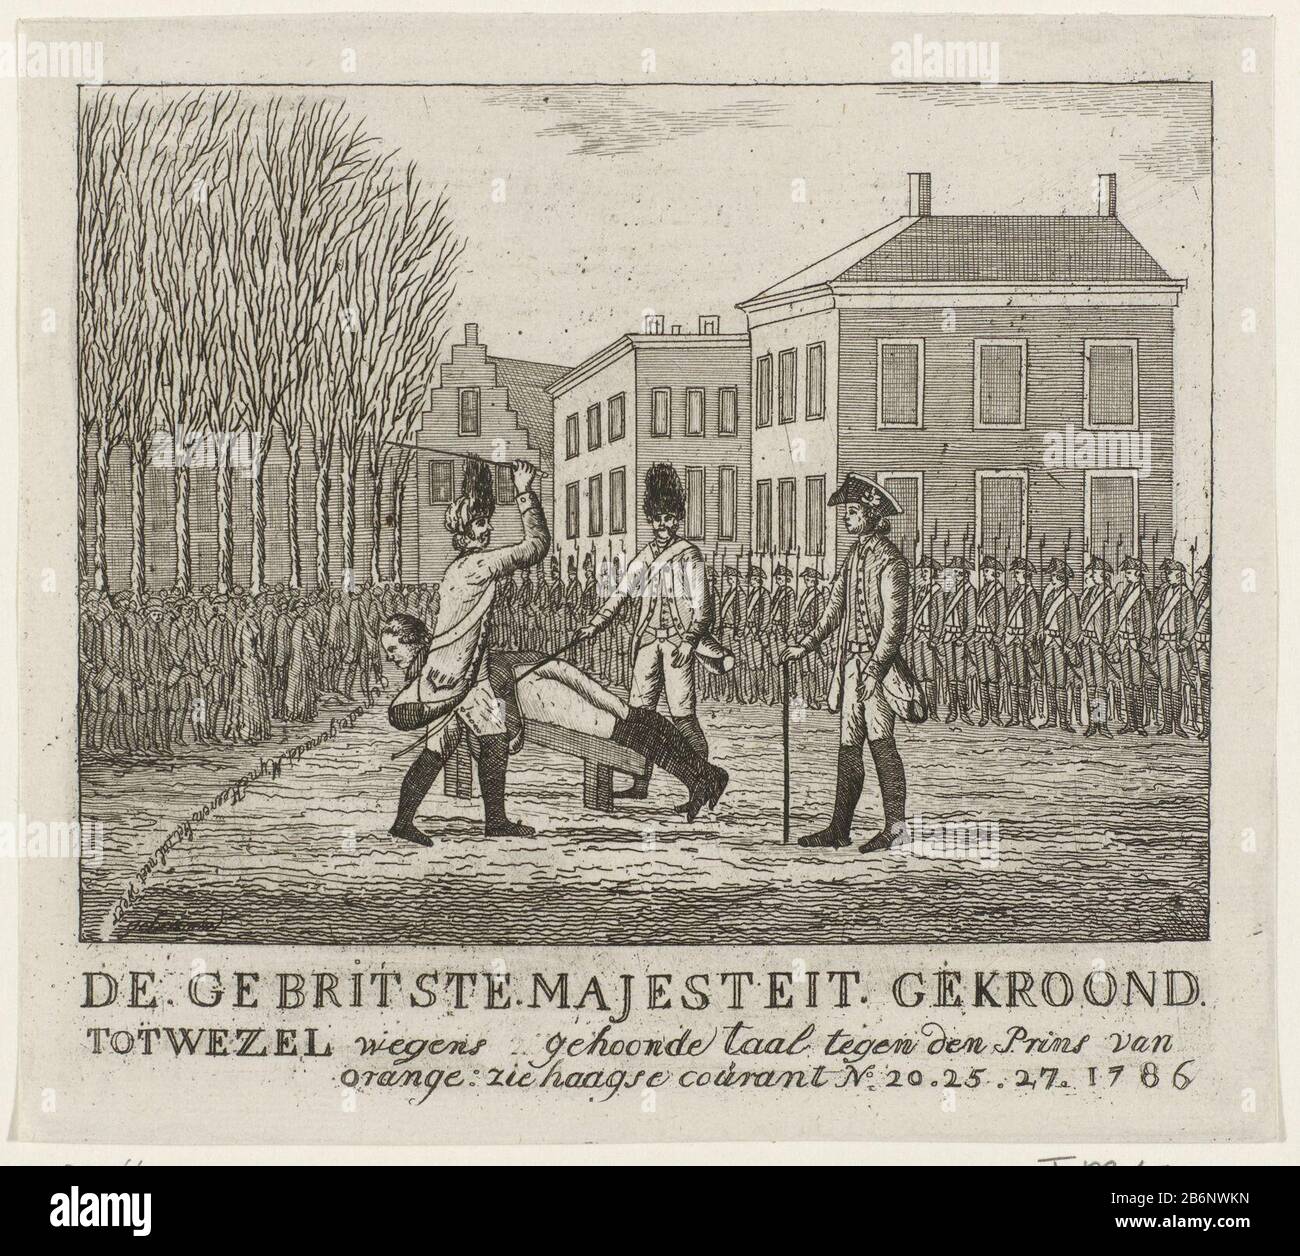 Geseling van een soldaat, 1786 De Gebritste Majesteit gekroond tot Wezel, wegens gehoonde taal tegen den Prins van orange (titel op object) Public punishment of a soldier for the honing of the prince of Orange. Flogging on a wooden trestle, in front of a group of soldiers and the crowd, 1786. The caption referring to the Hague Courant, Nos 20, 25 and 27. Manufacturer : printmaker: anonymous place manufacture: Northern Netherlands Date: 1786 Physical features: etching and engra materials : paper Technique: etching / engra (printing process) Measurements: sheet: h 178 mm × W 198 mm Subject: flog Stock Photo